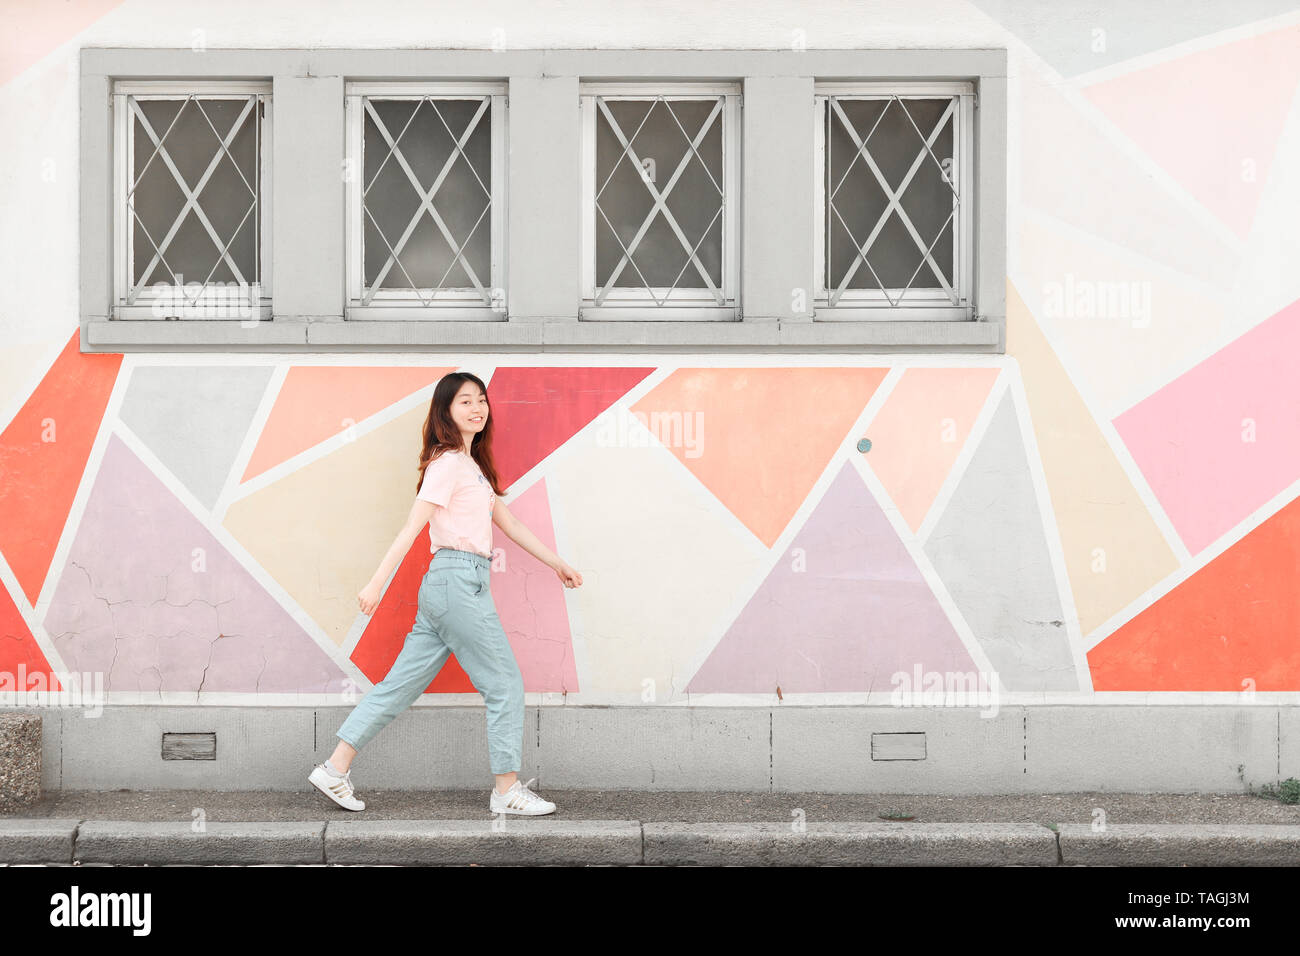 Young Asian Student / Model and Colorful Wall in Strasbourg, France, Europe Stock Photo